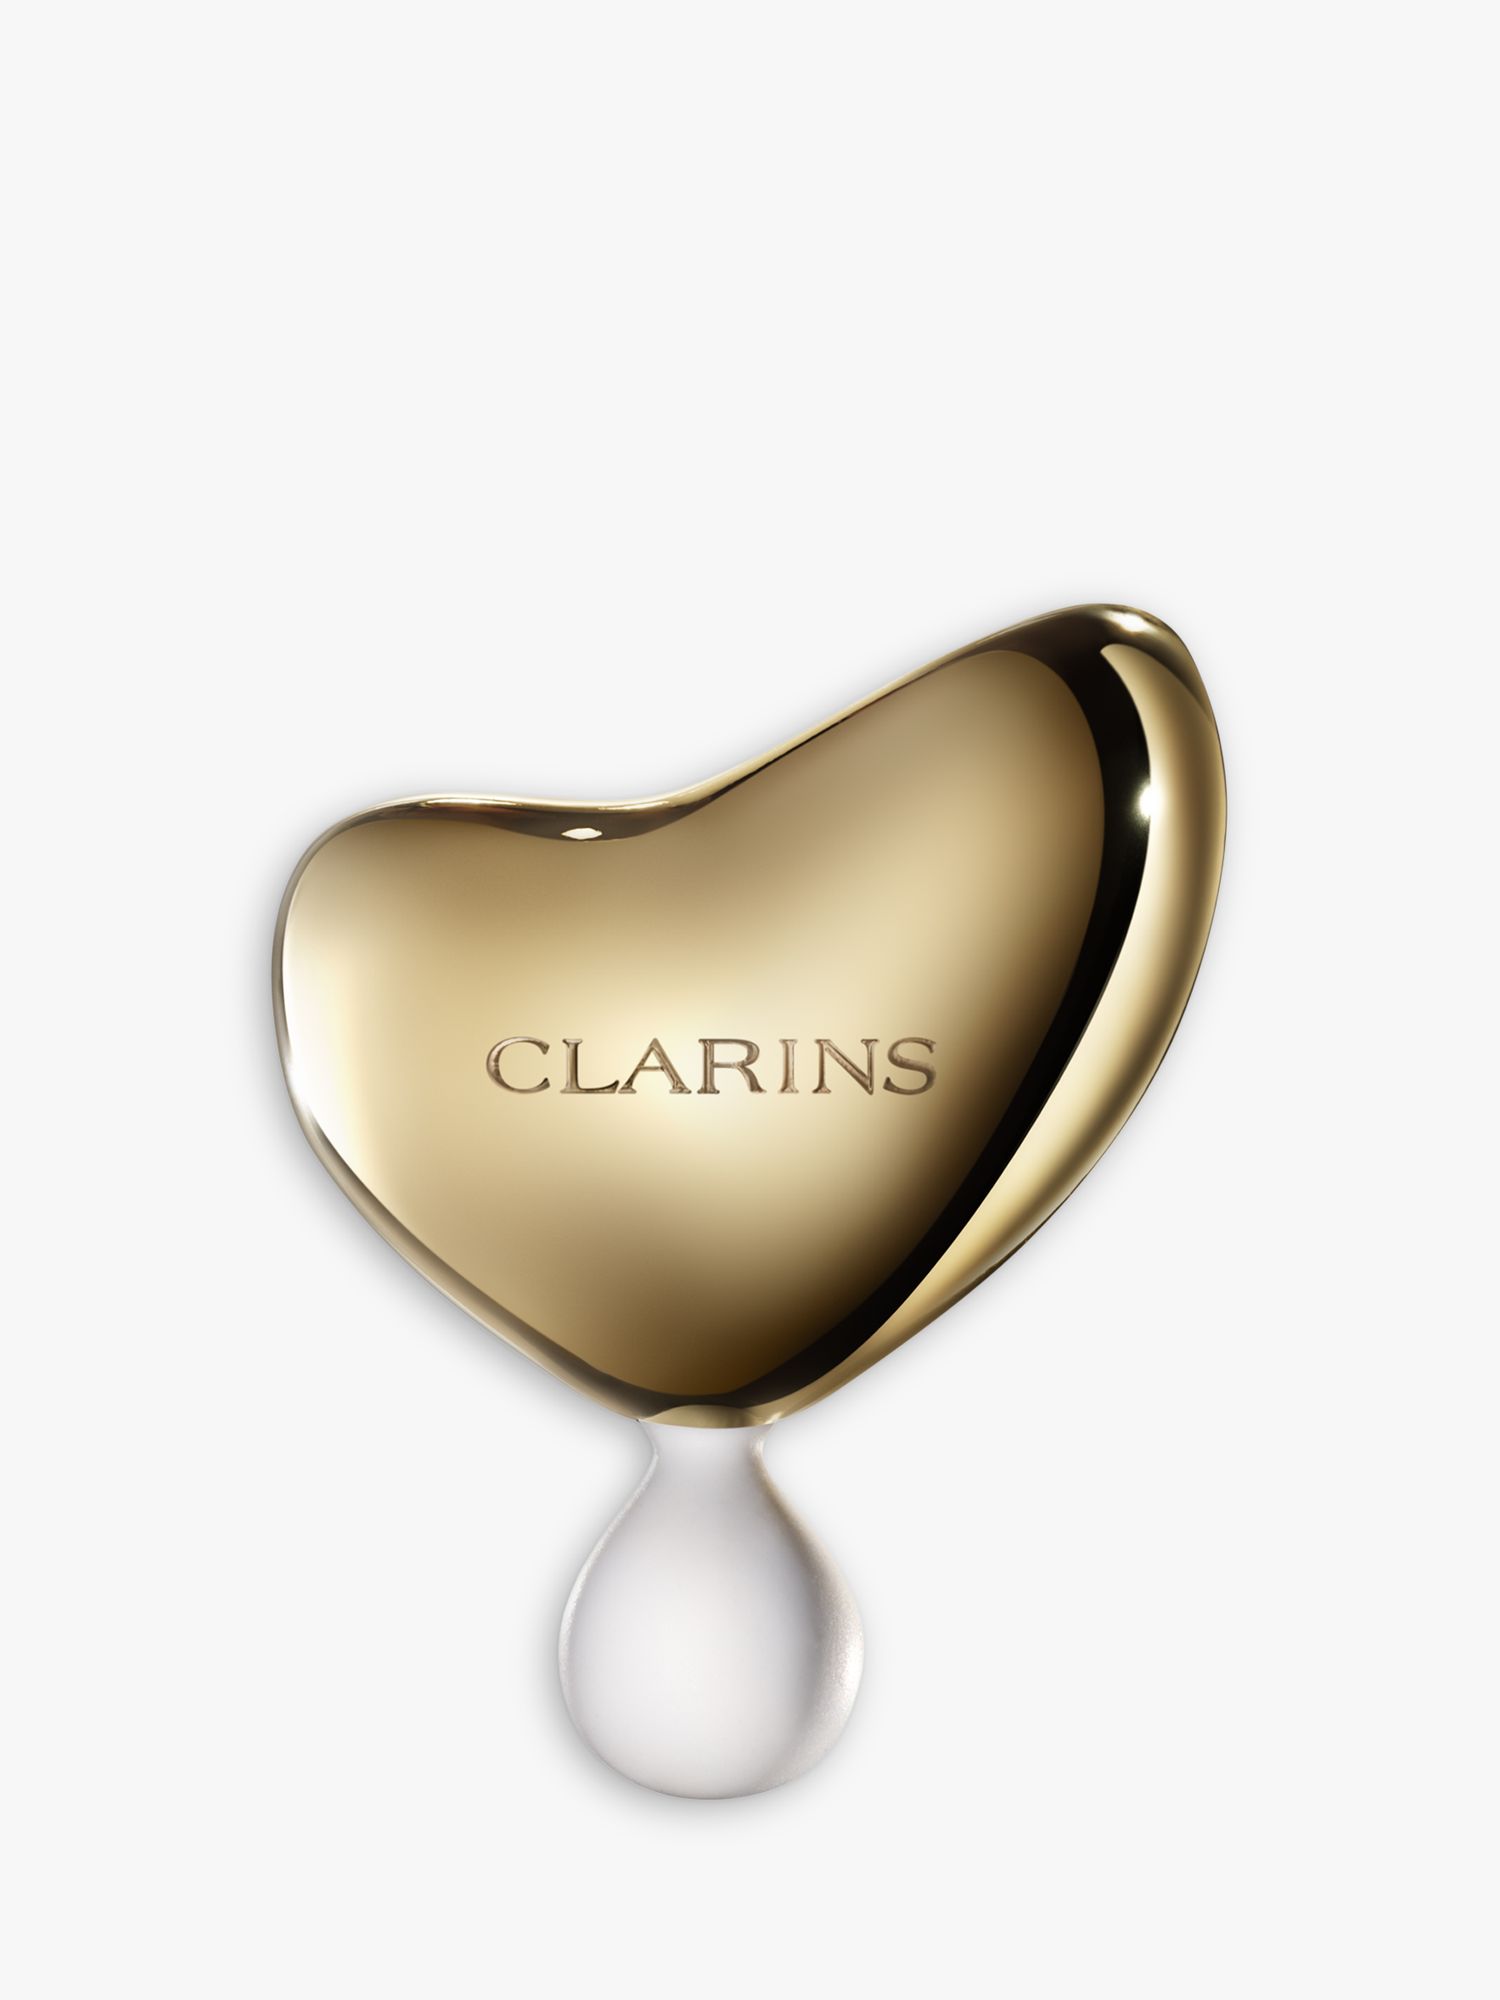 Clarins Precious L'Outil 3-in-1 Facial Massage Tool 1